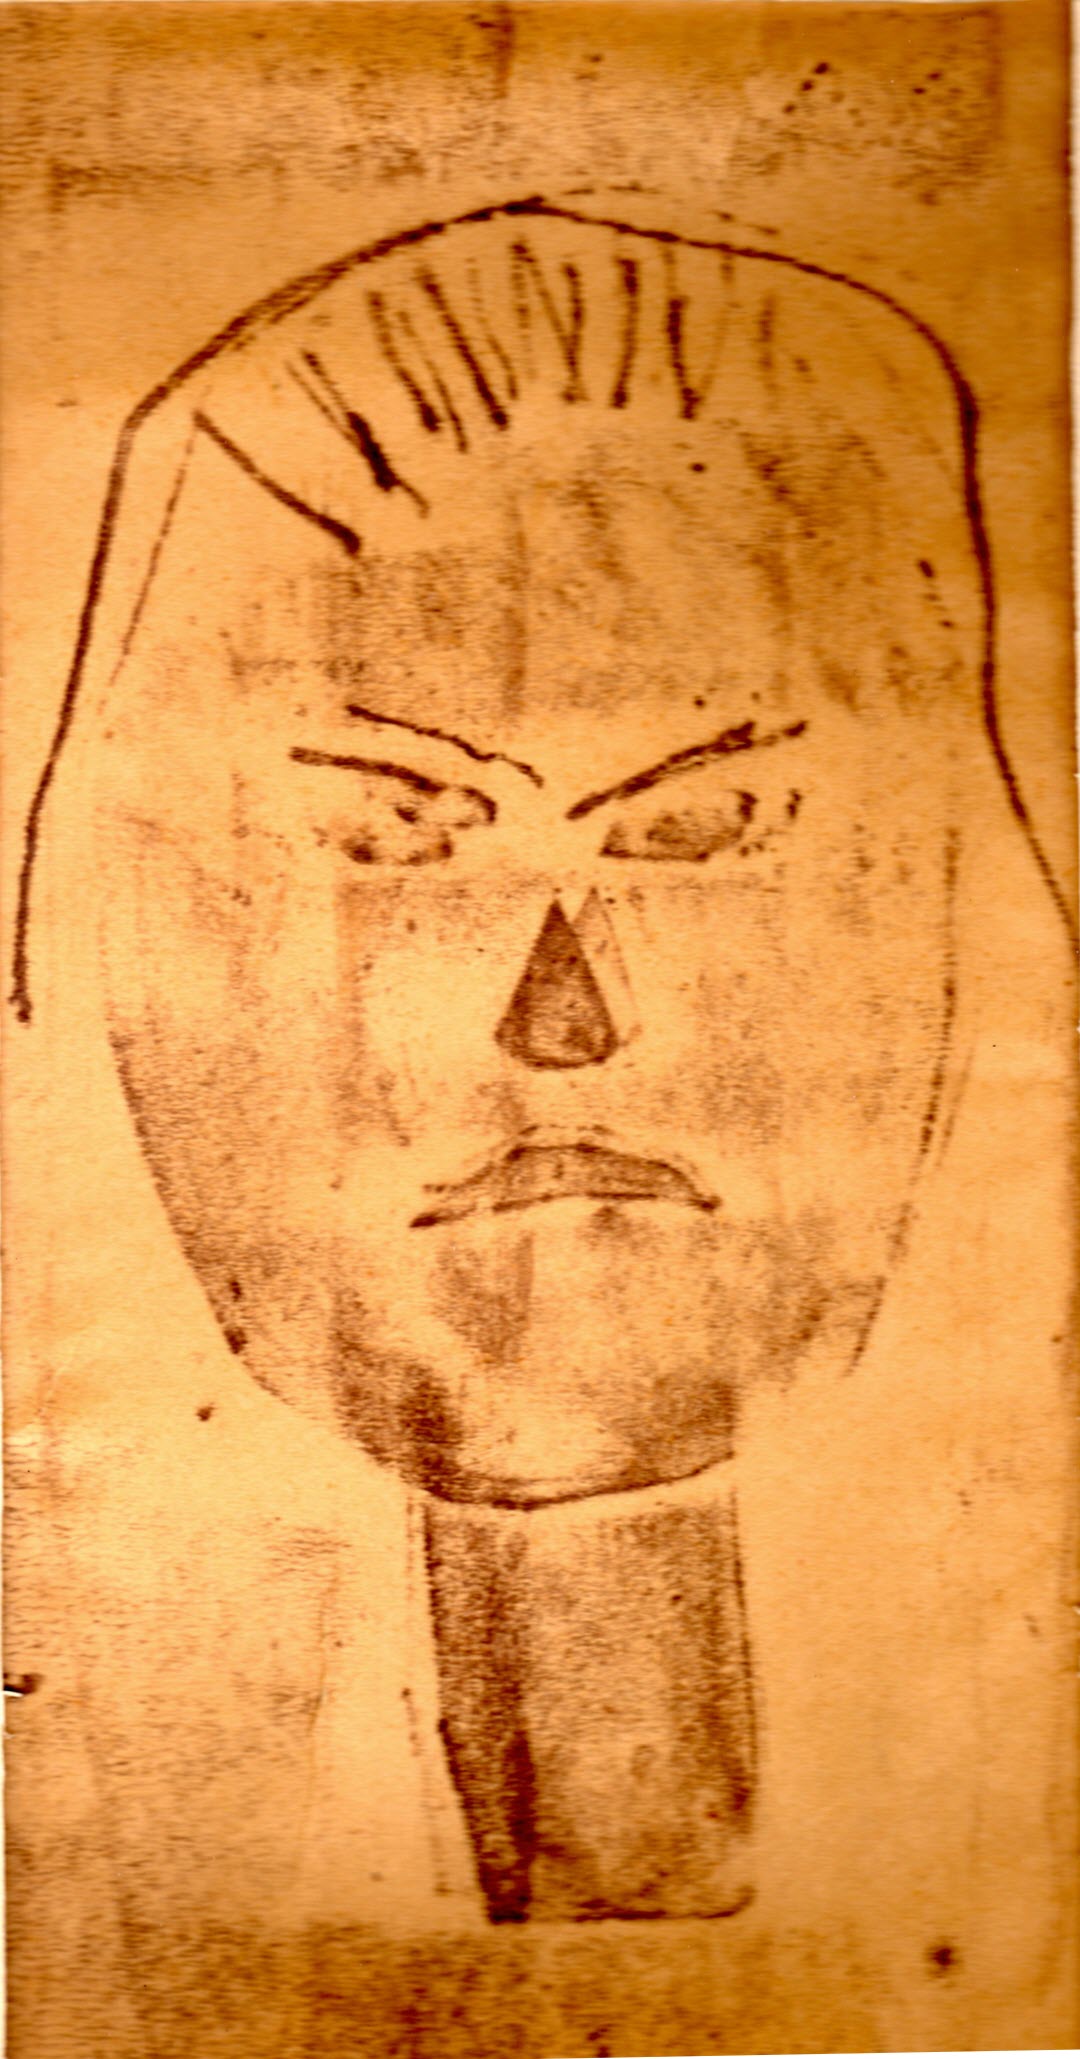 Etching of angry face